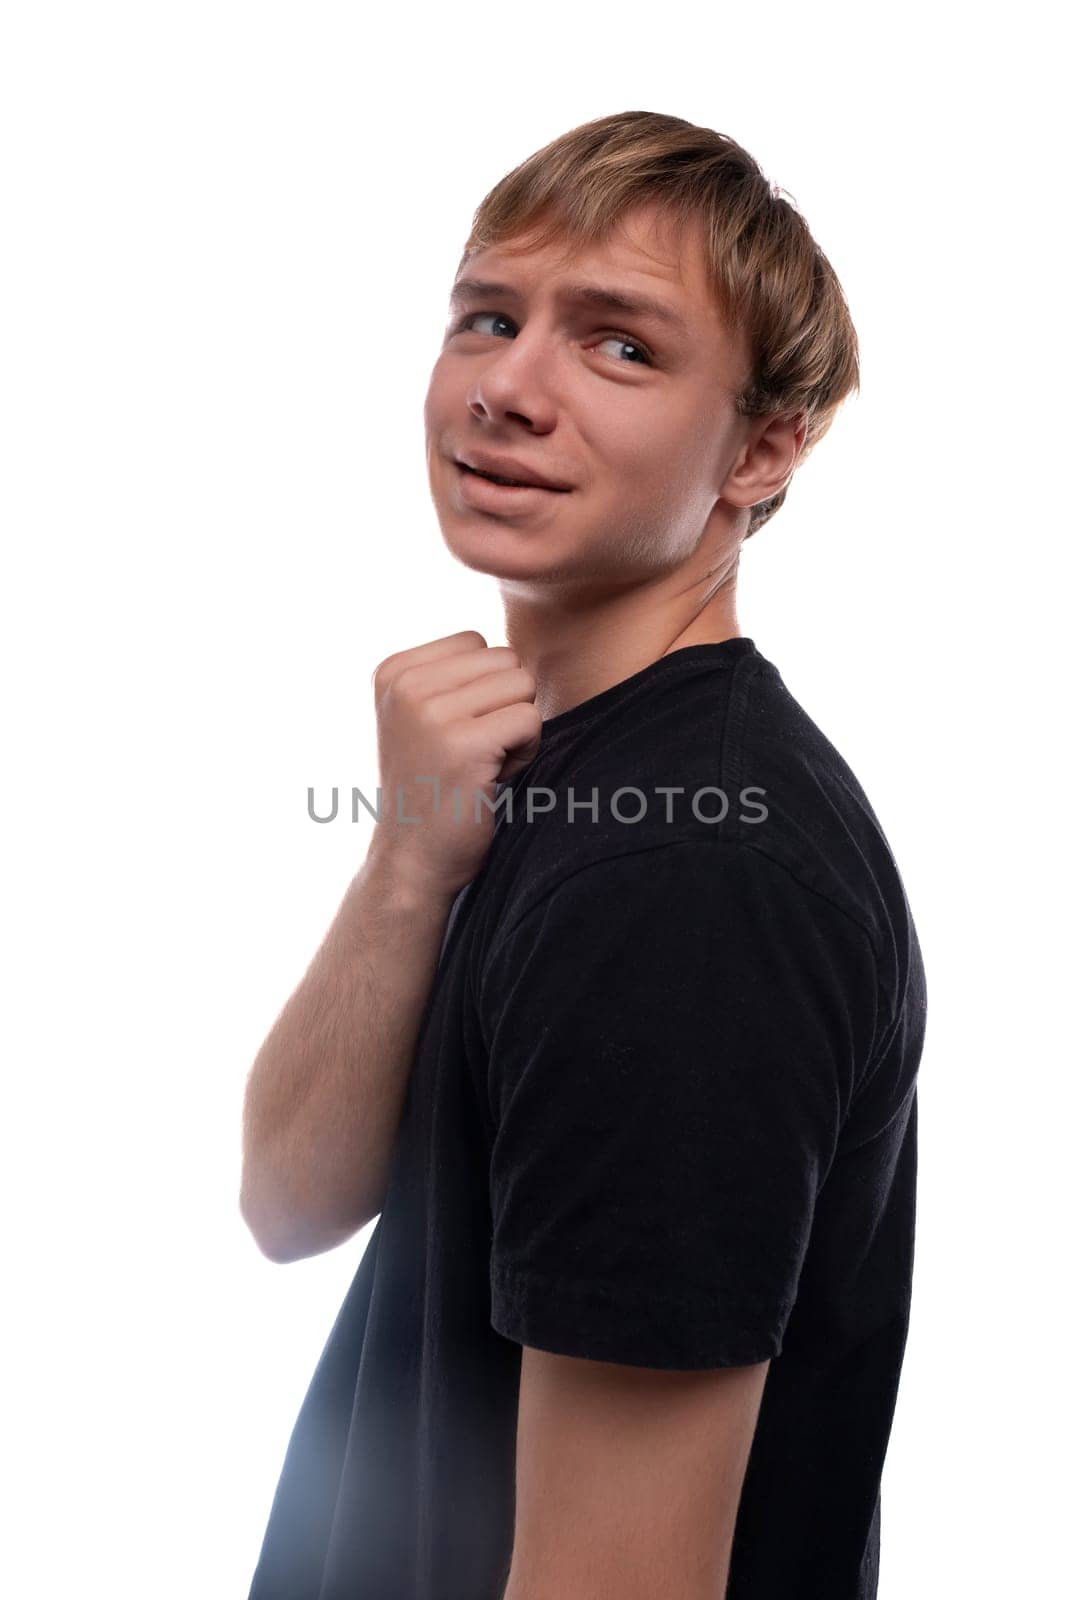 Blond teenager boy smiling on white background by TRMK